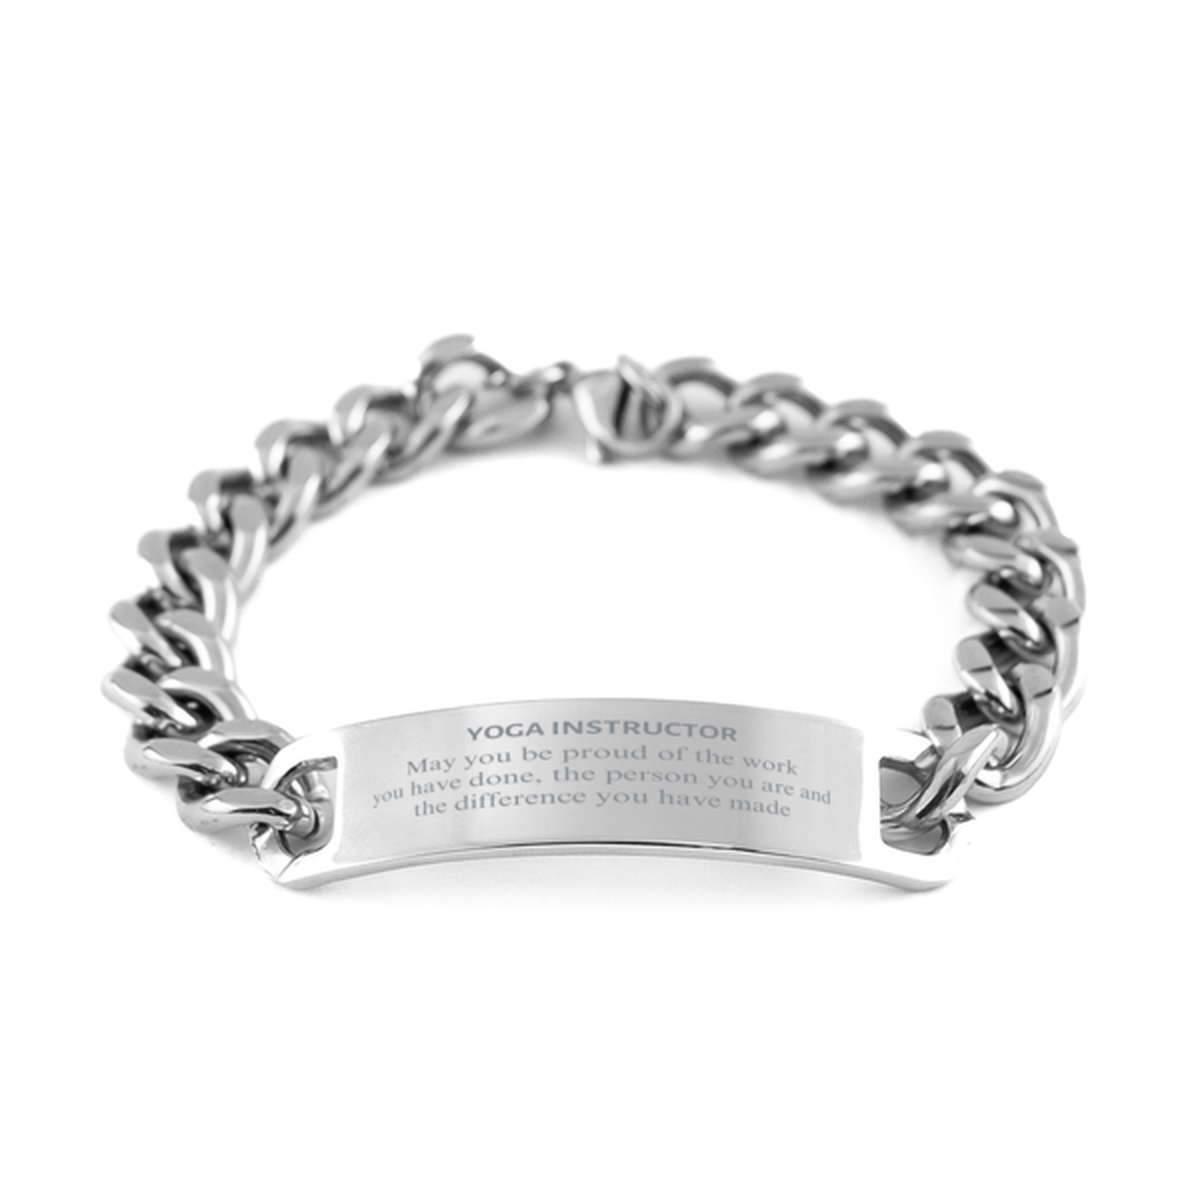 Yoga Instructor May you be proud of the work you have done, Retirement Yoga Instructor Cuban Chain Stainless Steel Bracelet for Colleague Appreciation Gifts Amazing for Yoga Instructor